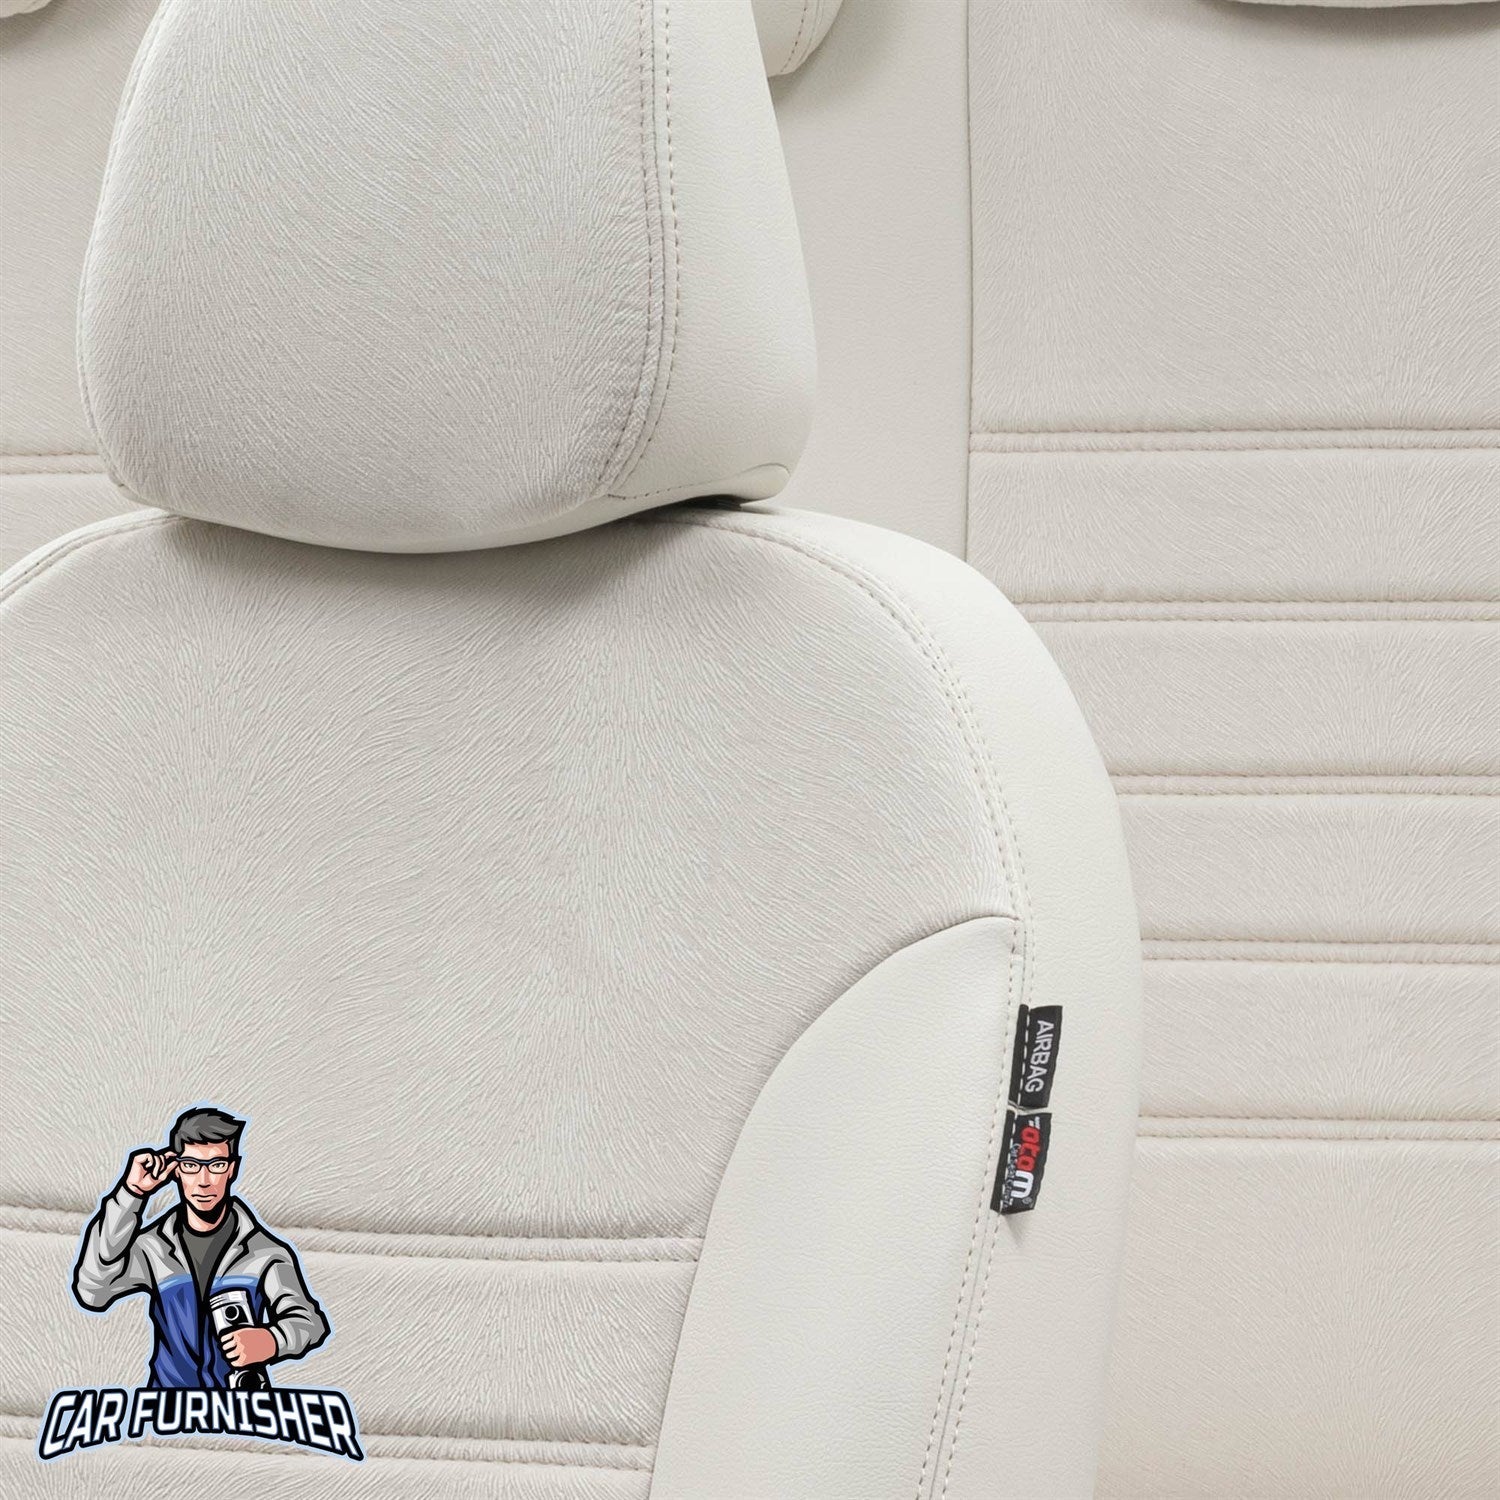 Ford Mondeo Seat Covers London Foal Feather Design Ivory Leather & Foal Feather